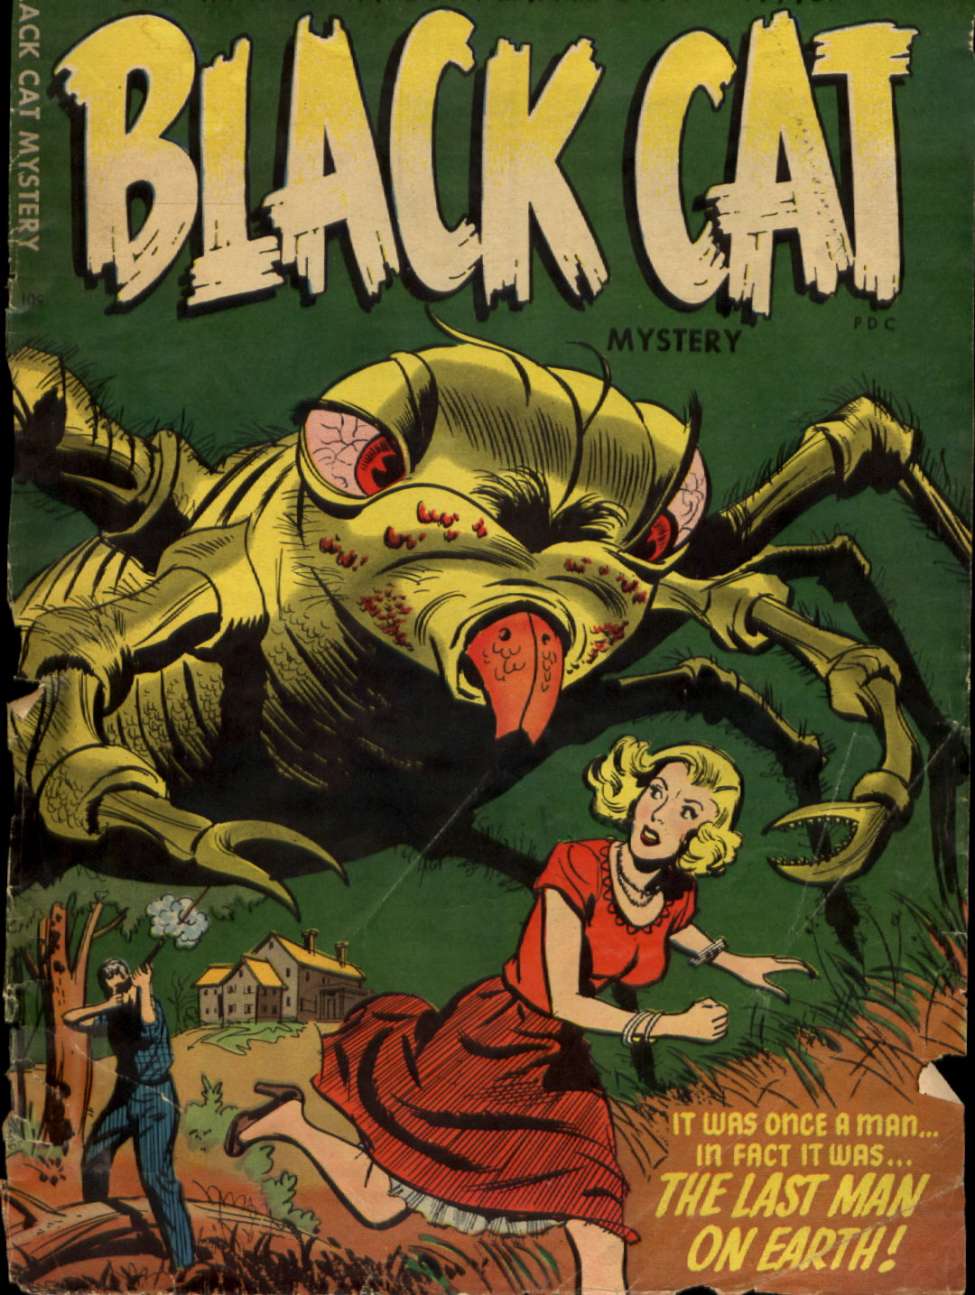 Book Cover For Black Cat 53 (Mystery)